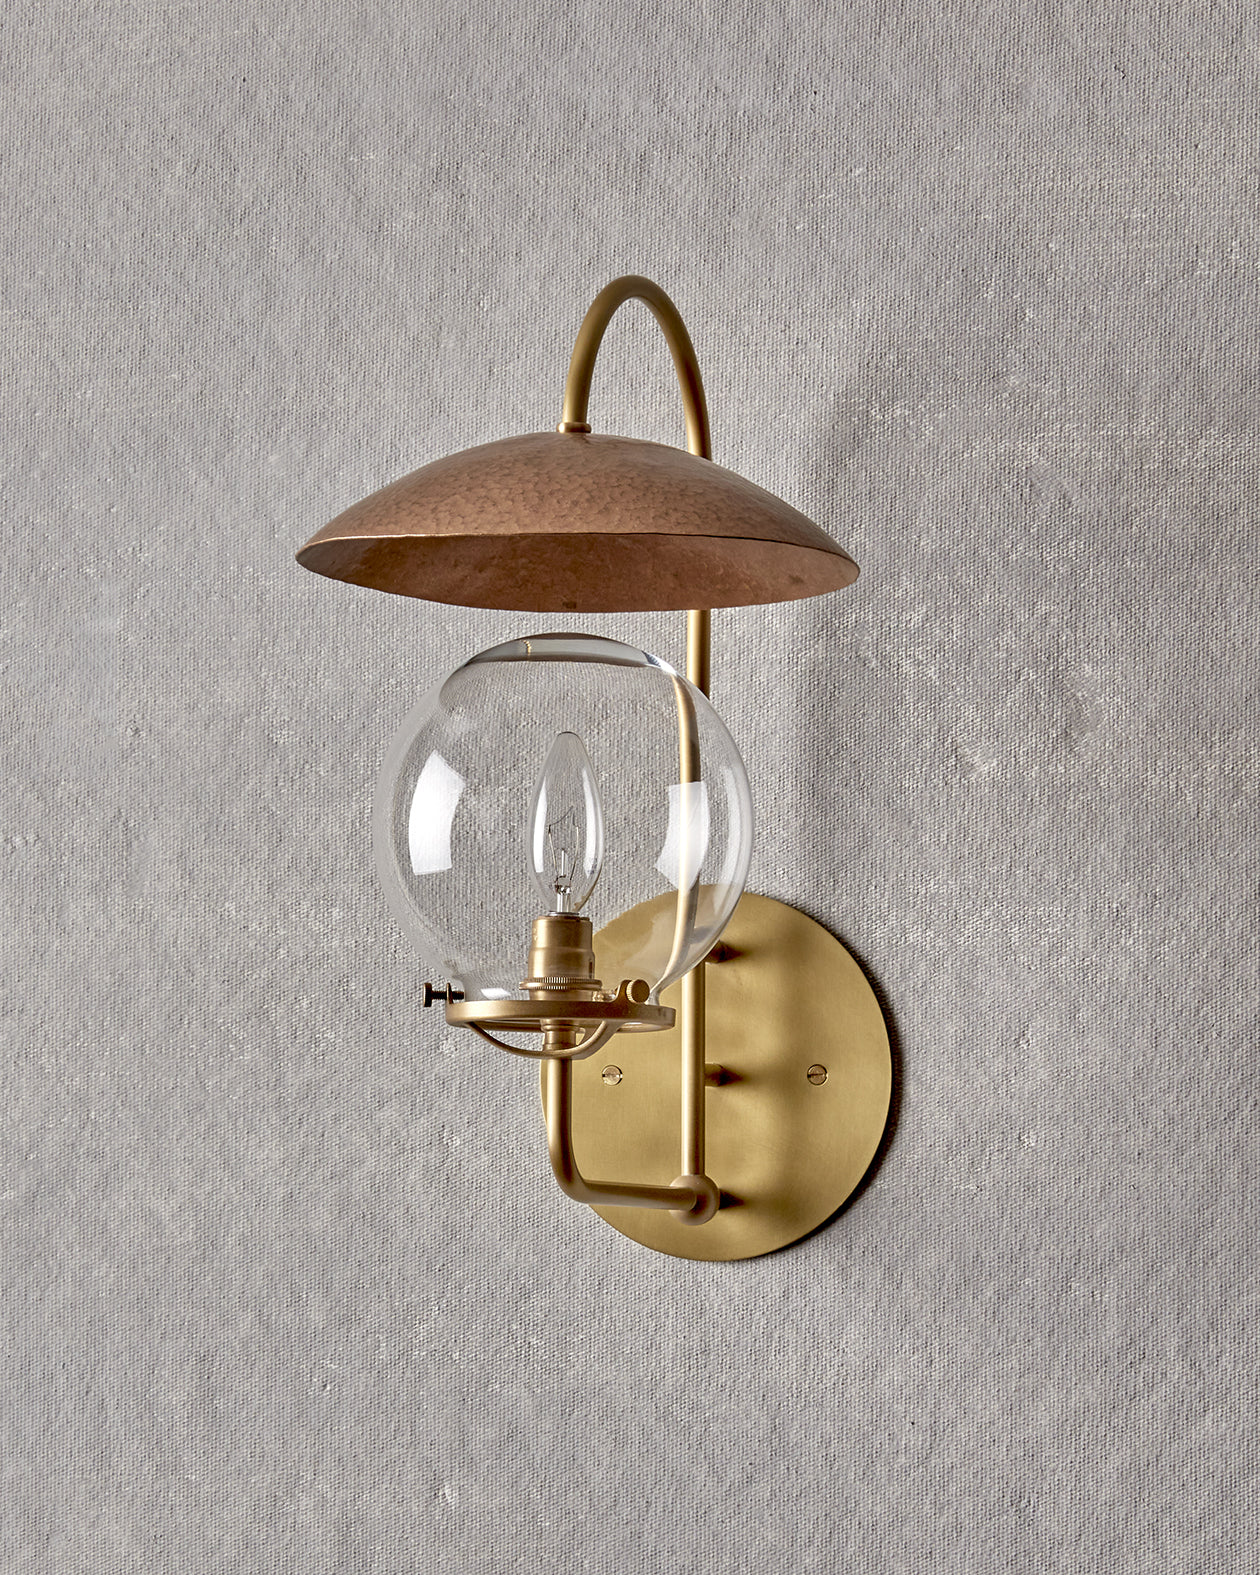 Robert True Ogden RTO Lighting - Mia Wall Sconce - Hammered Brushed Satin Bronze Shade - Brushed Satin Brass Backplate and Armature - Clear Glass Globe#finish_brushed-satin-brass-with-hammered-satin-bronze